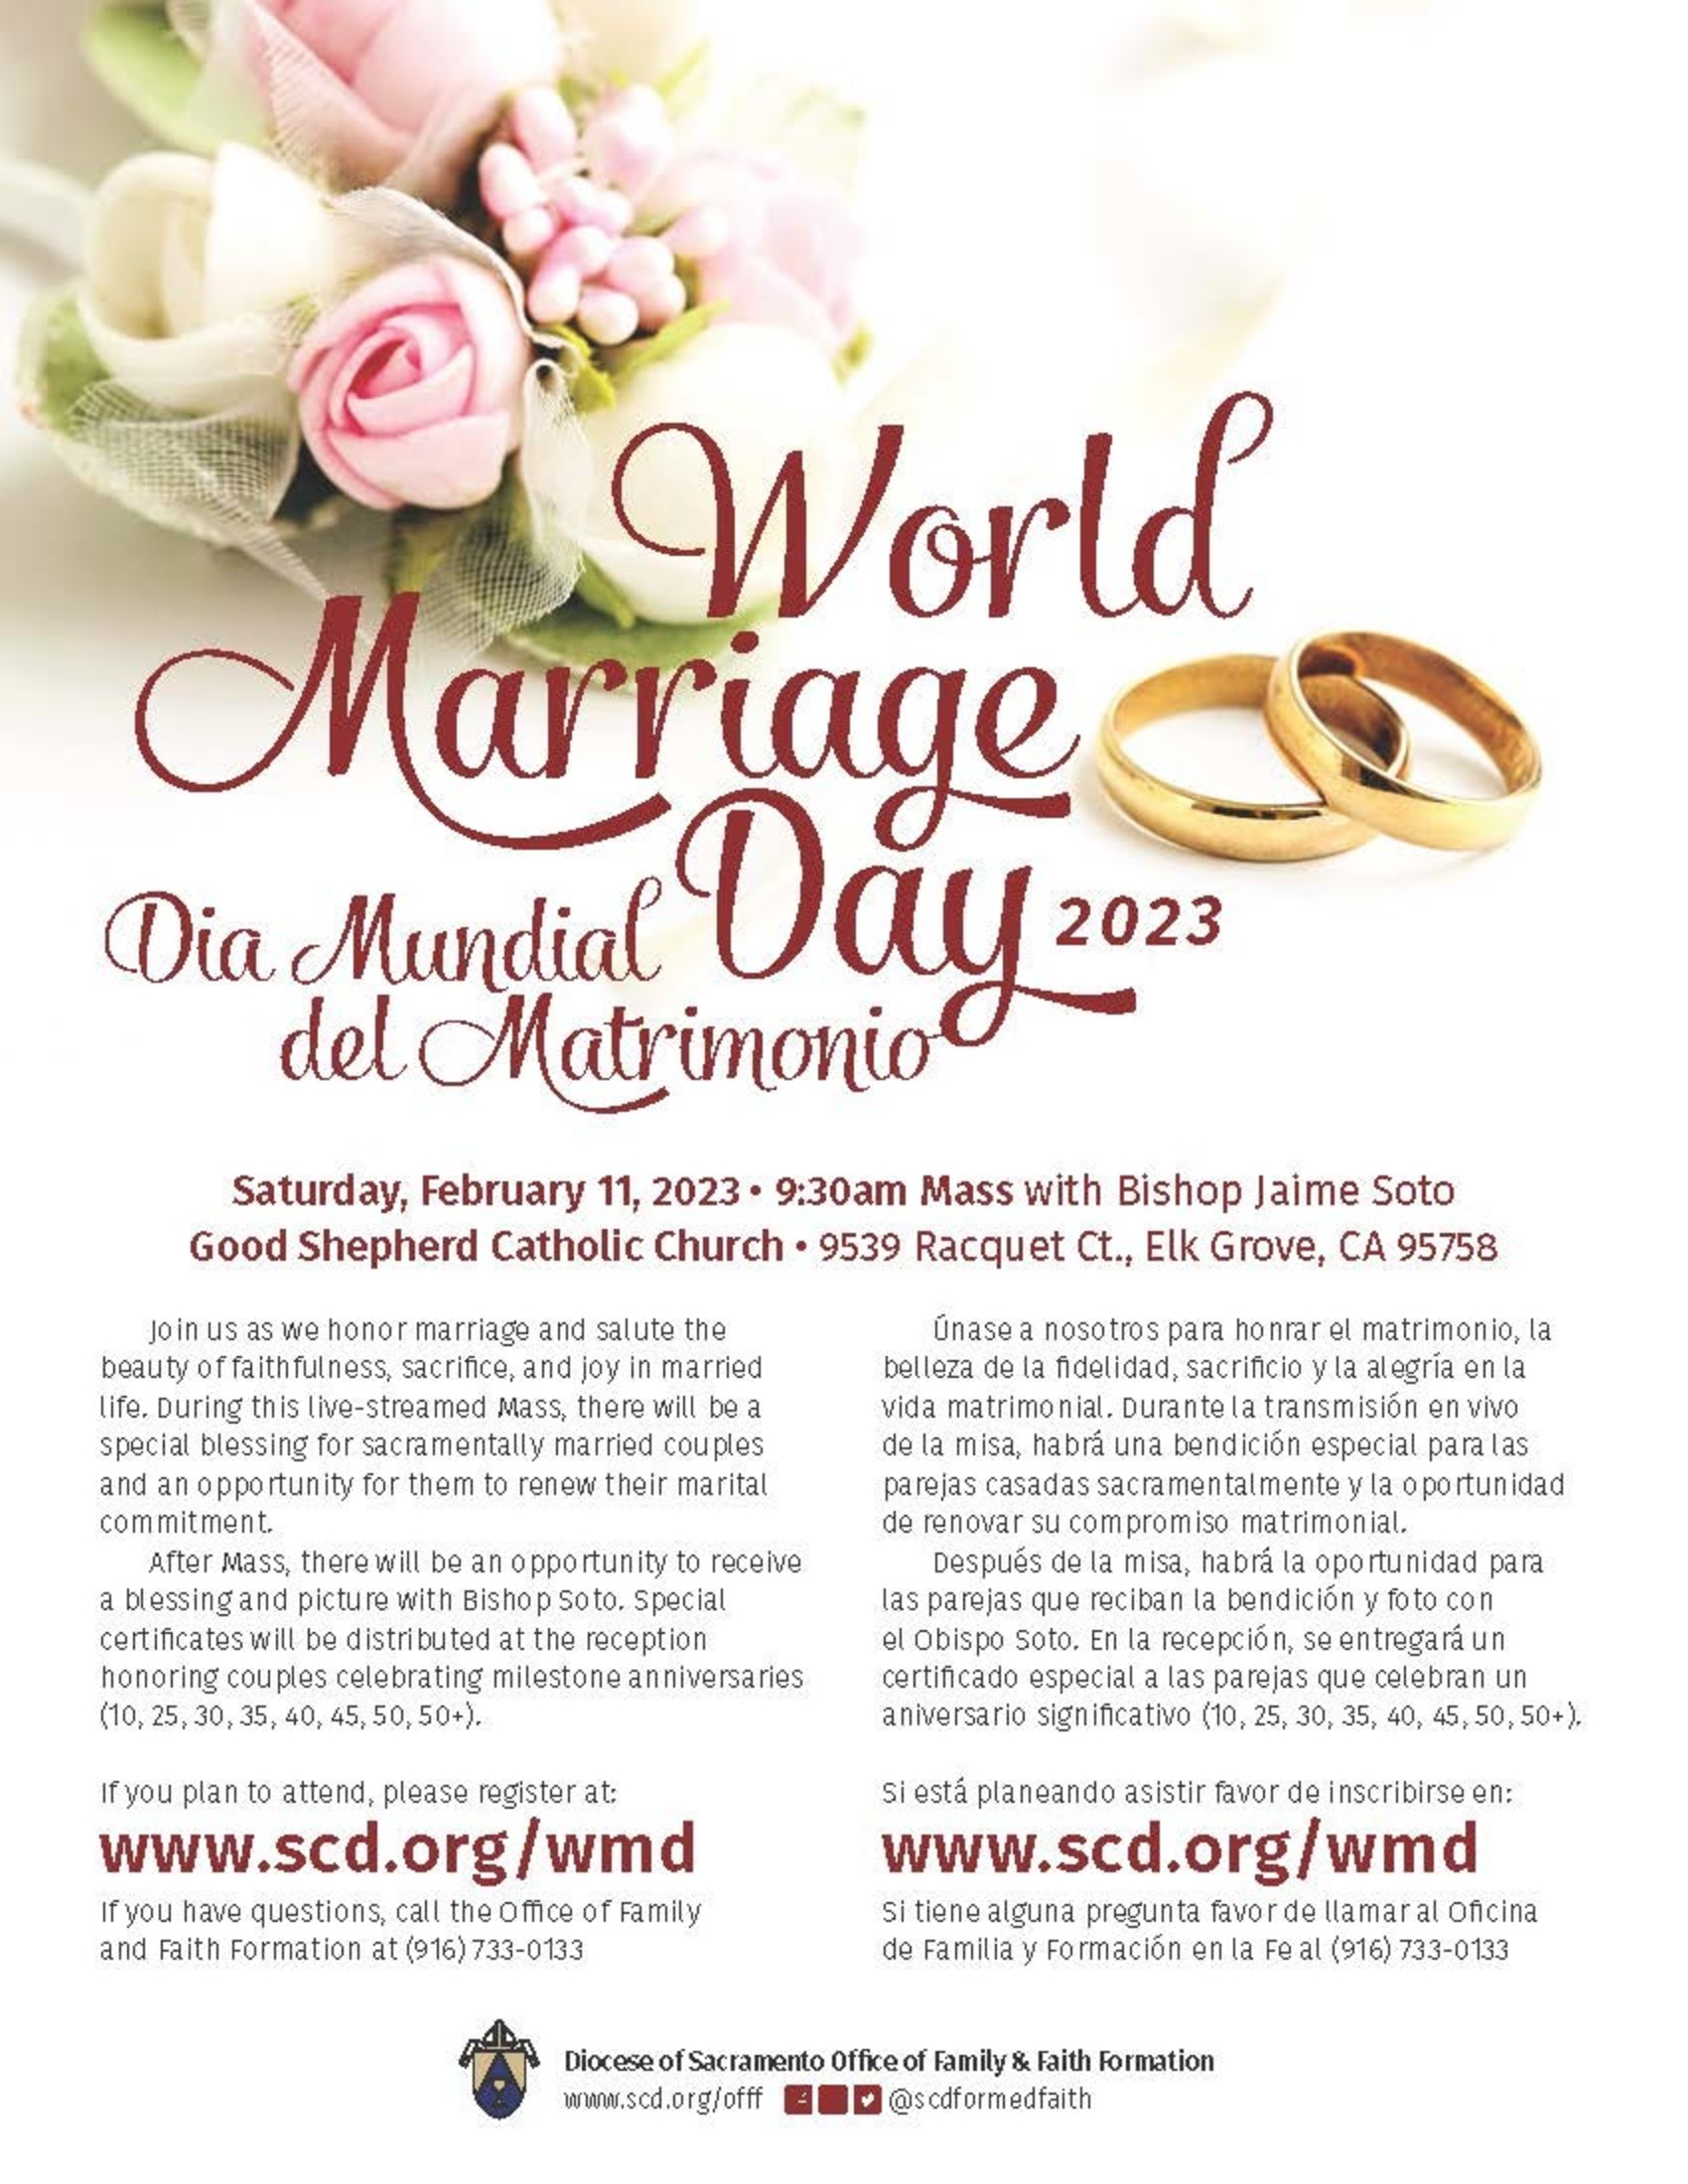 World Marriage Day 2023